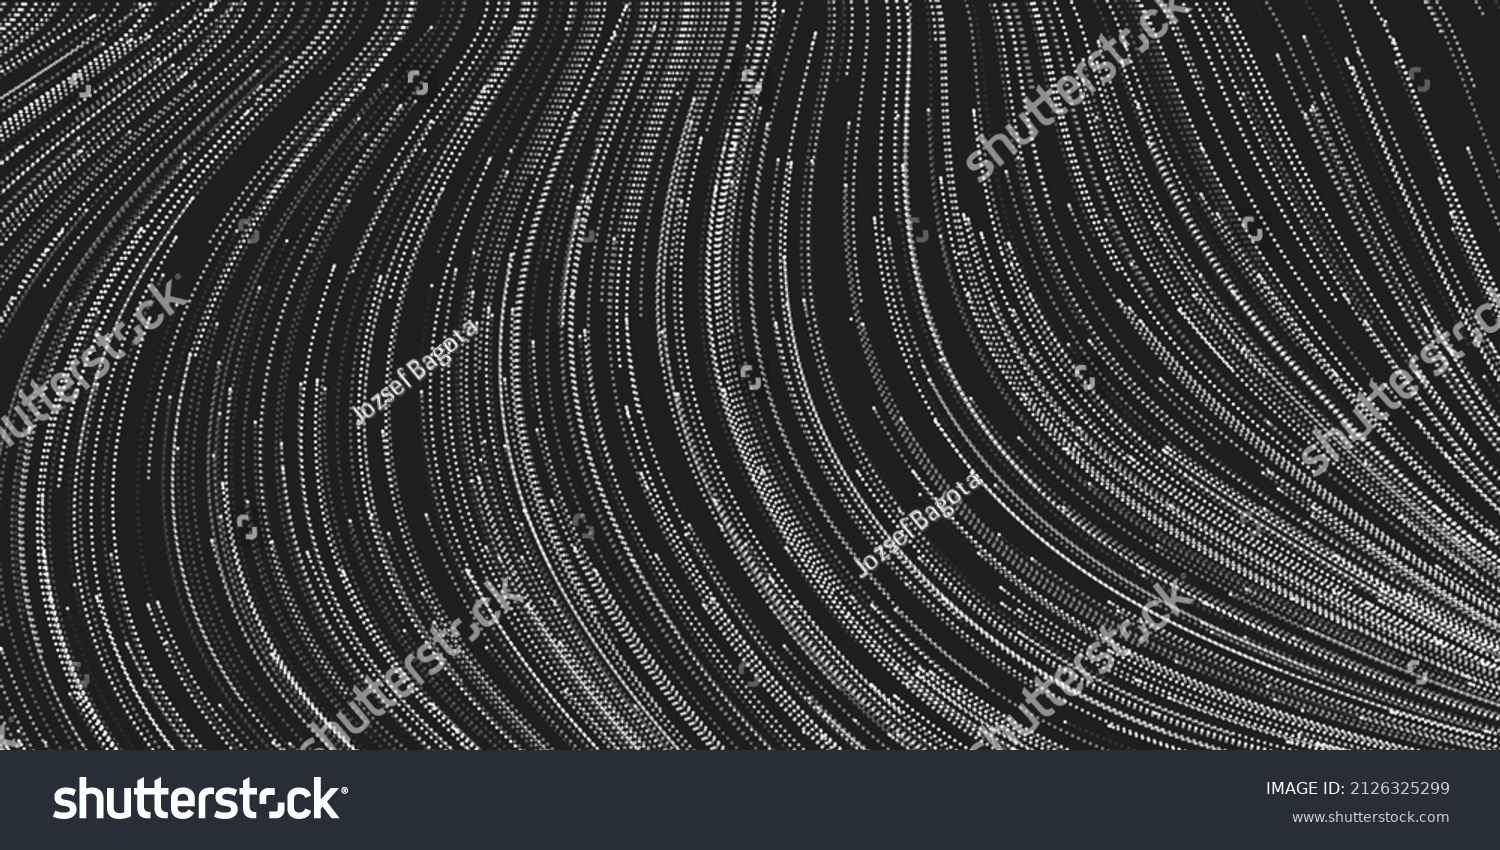 SVG of Black and White Moving Particles in Curving Lines - Modern Style Striped Pattern, Digitally Generated Dark Futuristic Abstract Geometric Background Design in Editable Vector Format svg